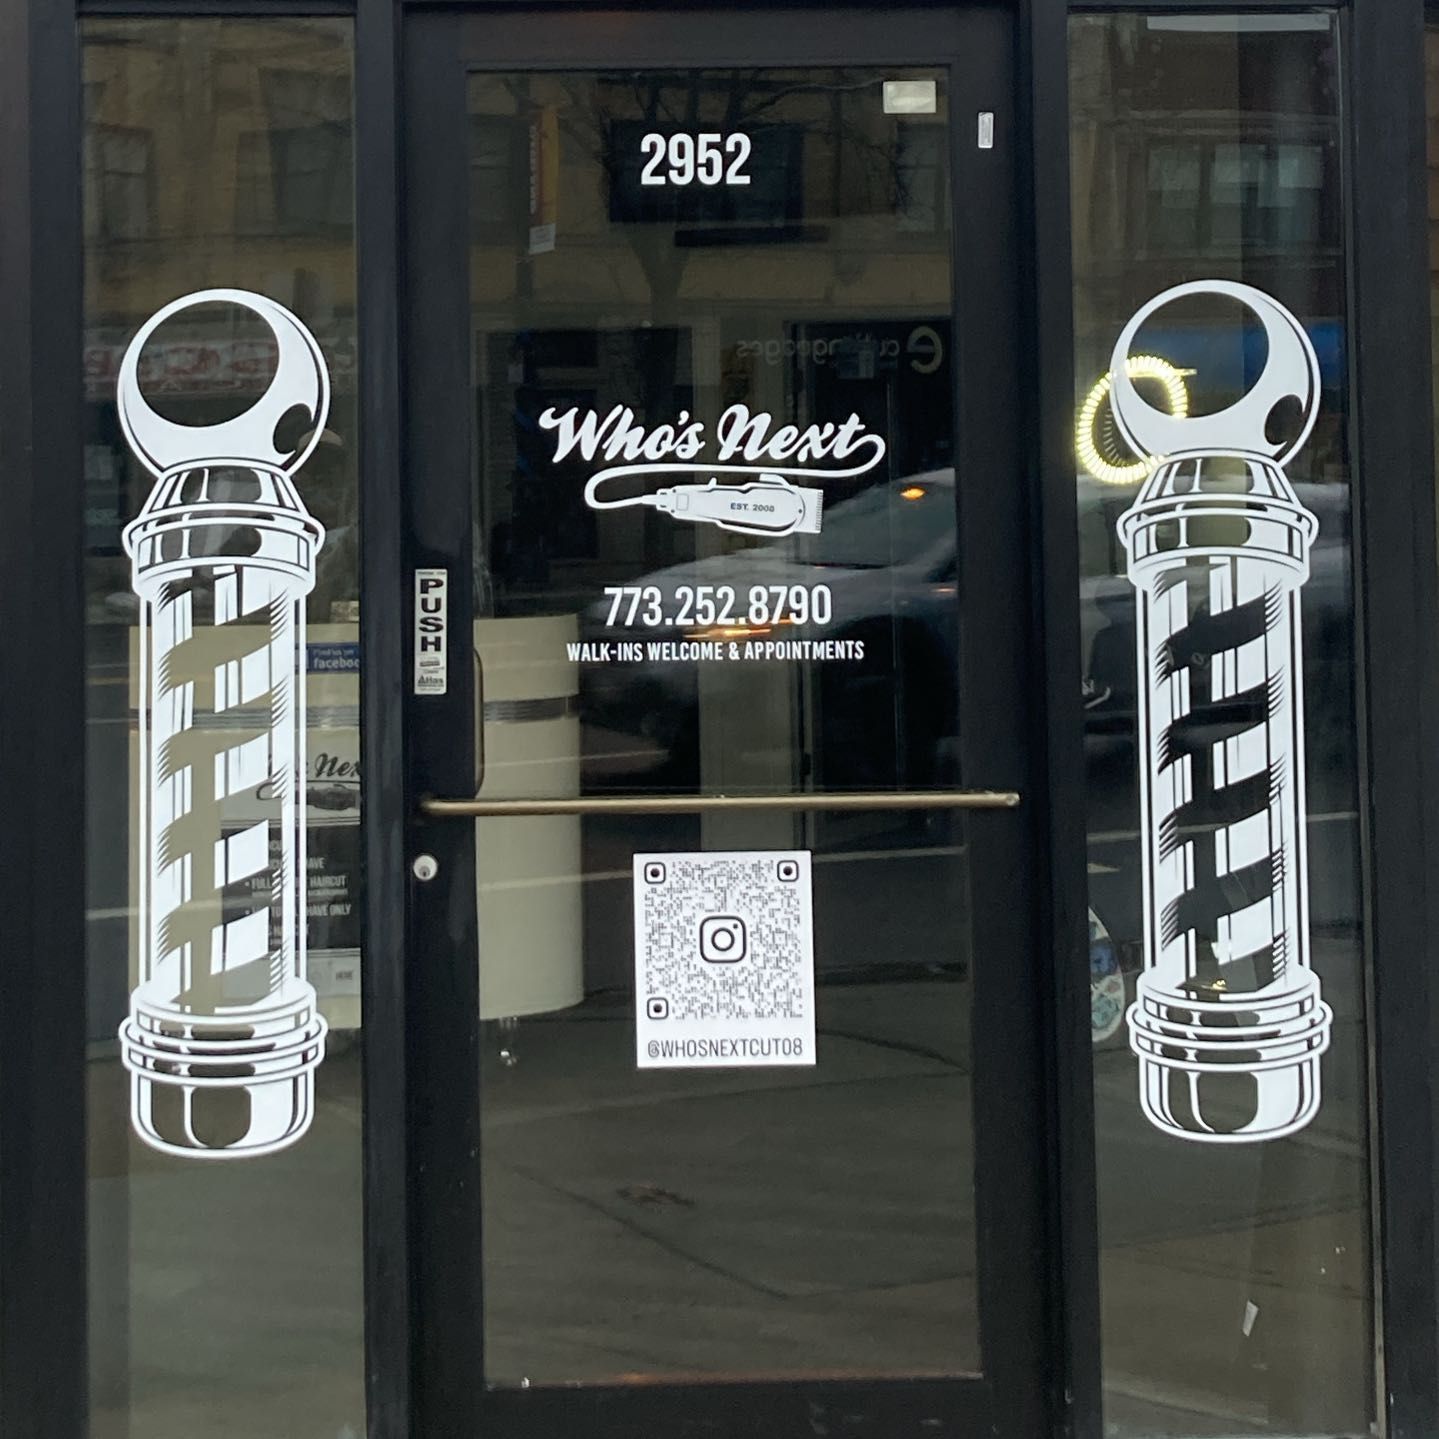 Who’s next barbershop, 2952 W Irving Park Rd, Chicago, 60618